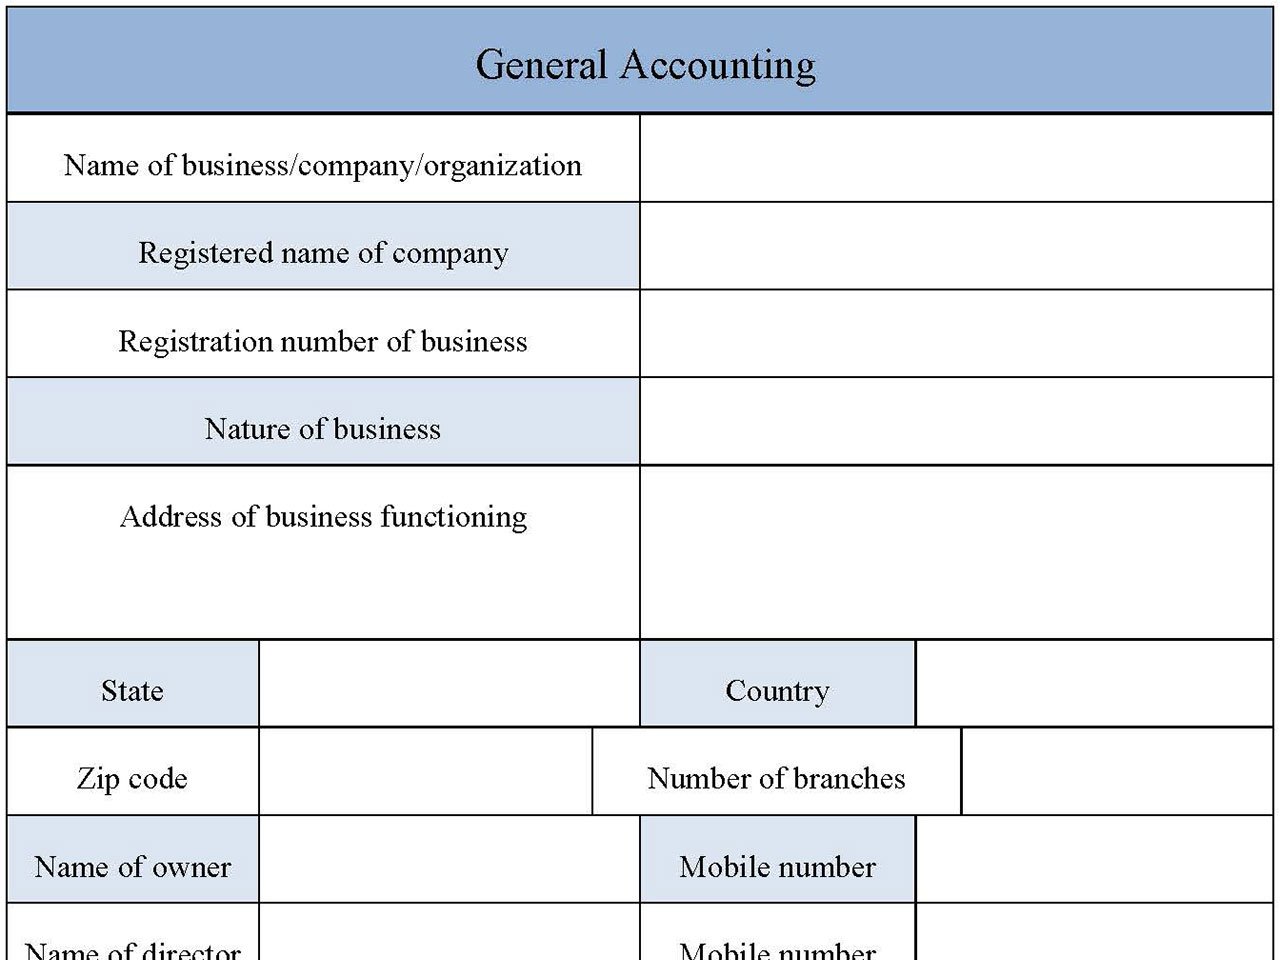 General Accounting Form